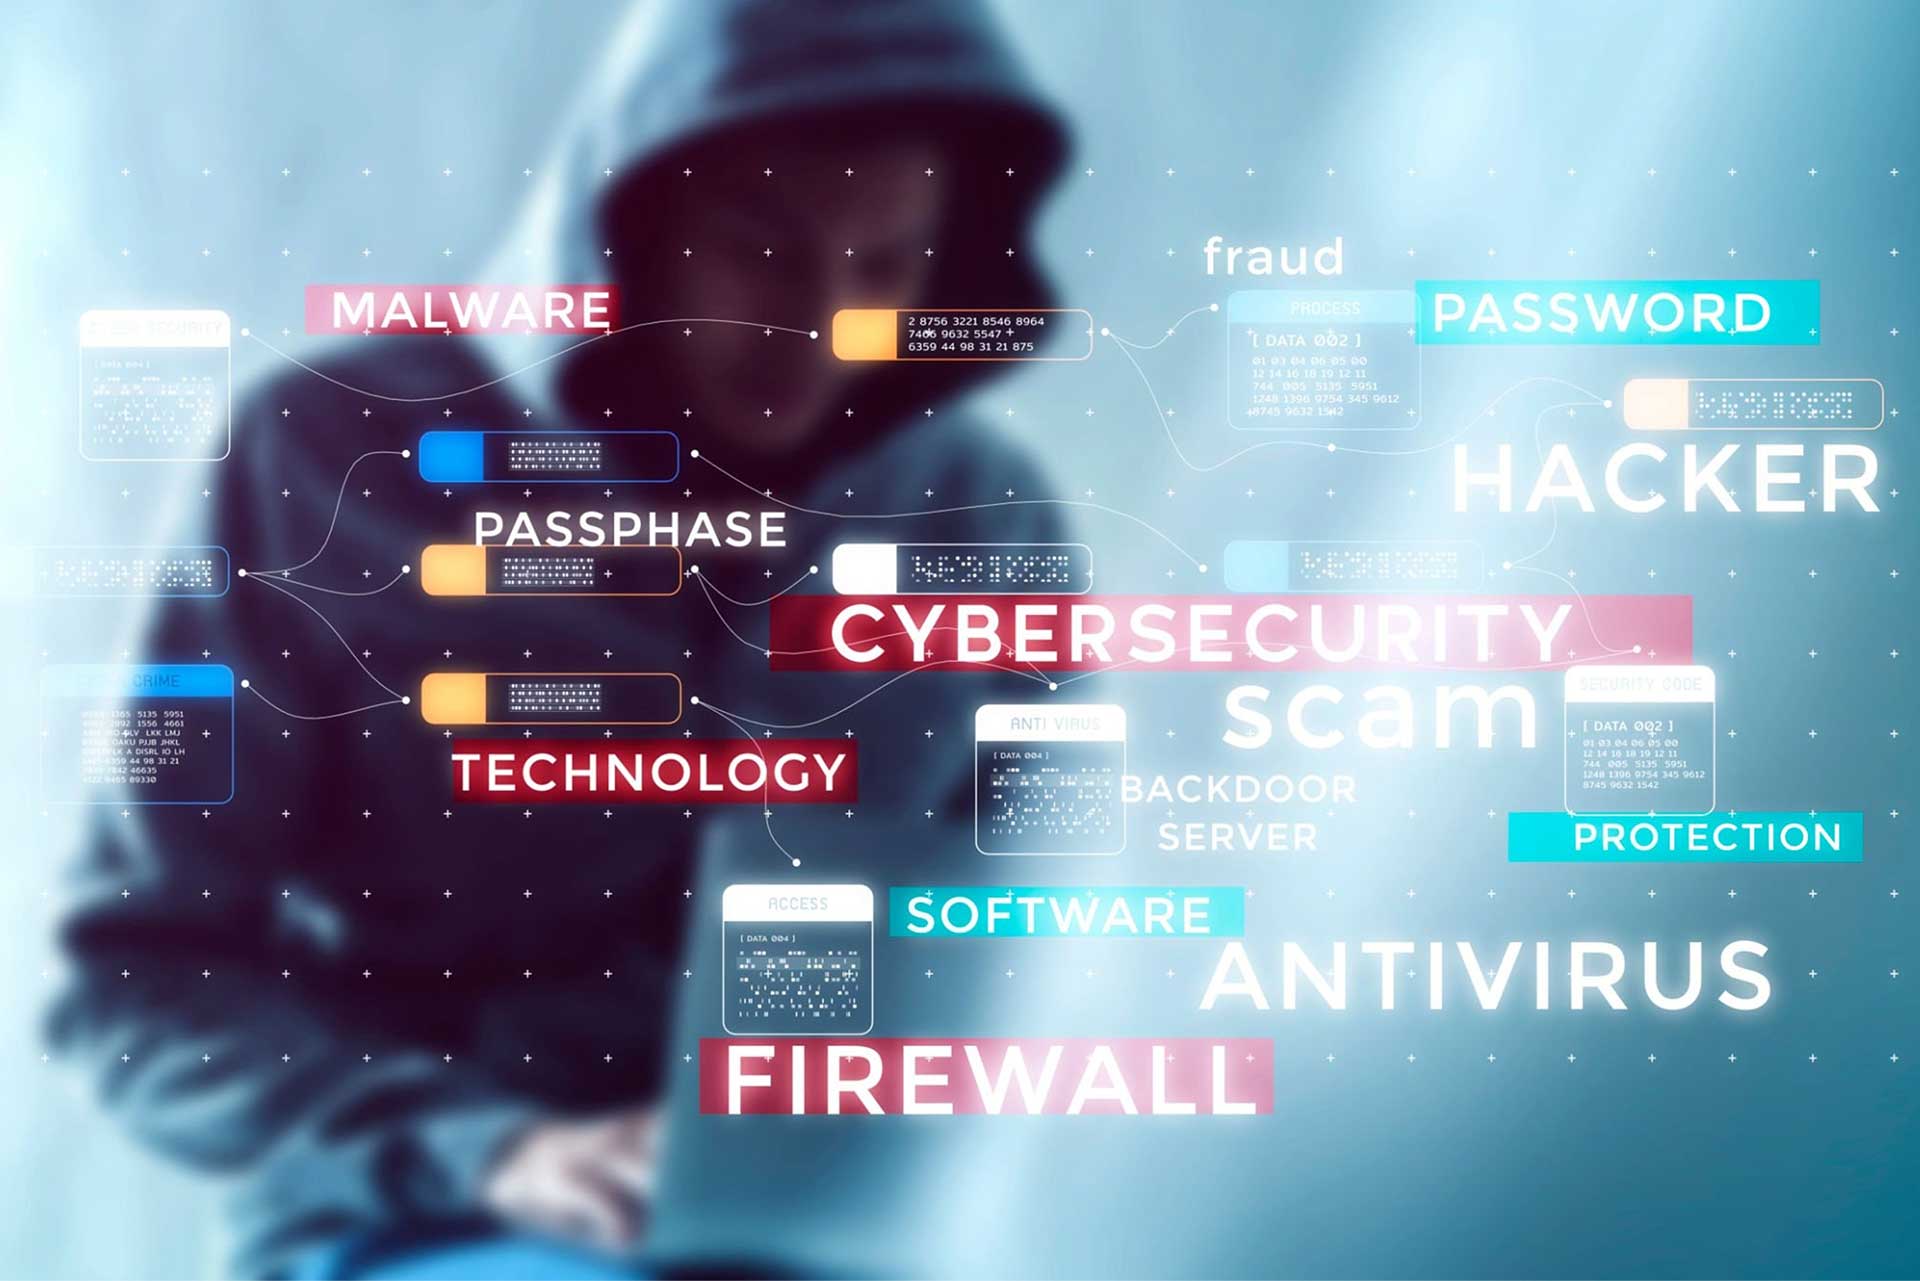 Back Skill gap plagues cyber security industry as jobs go unfilled